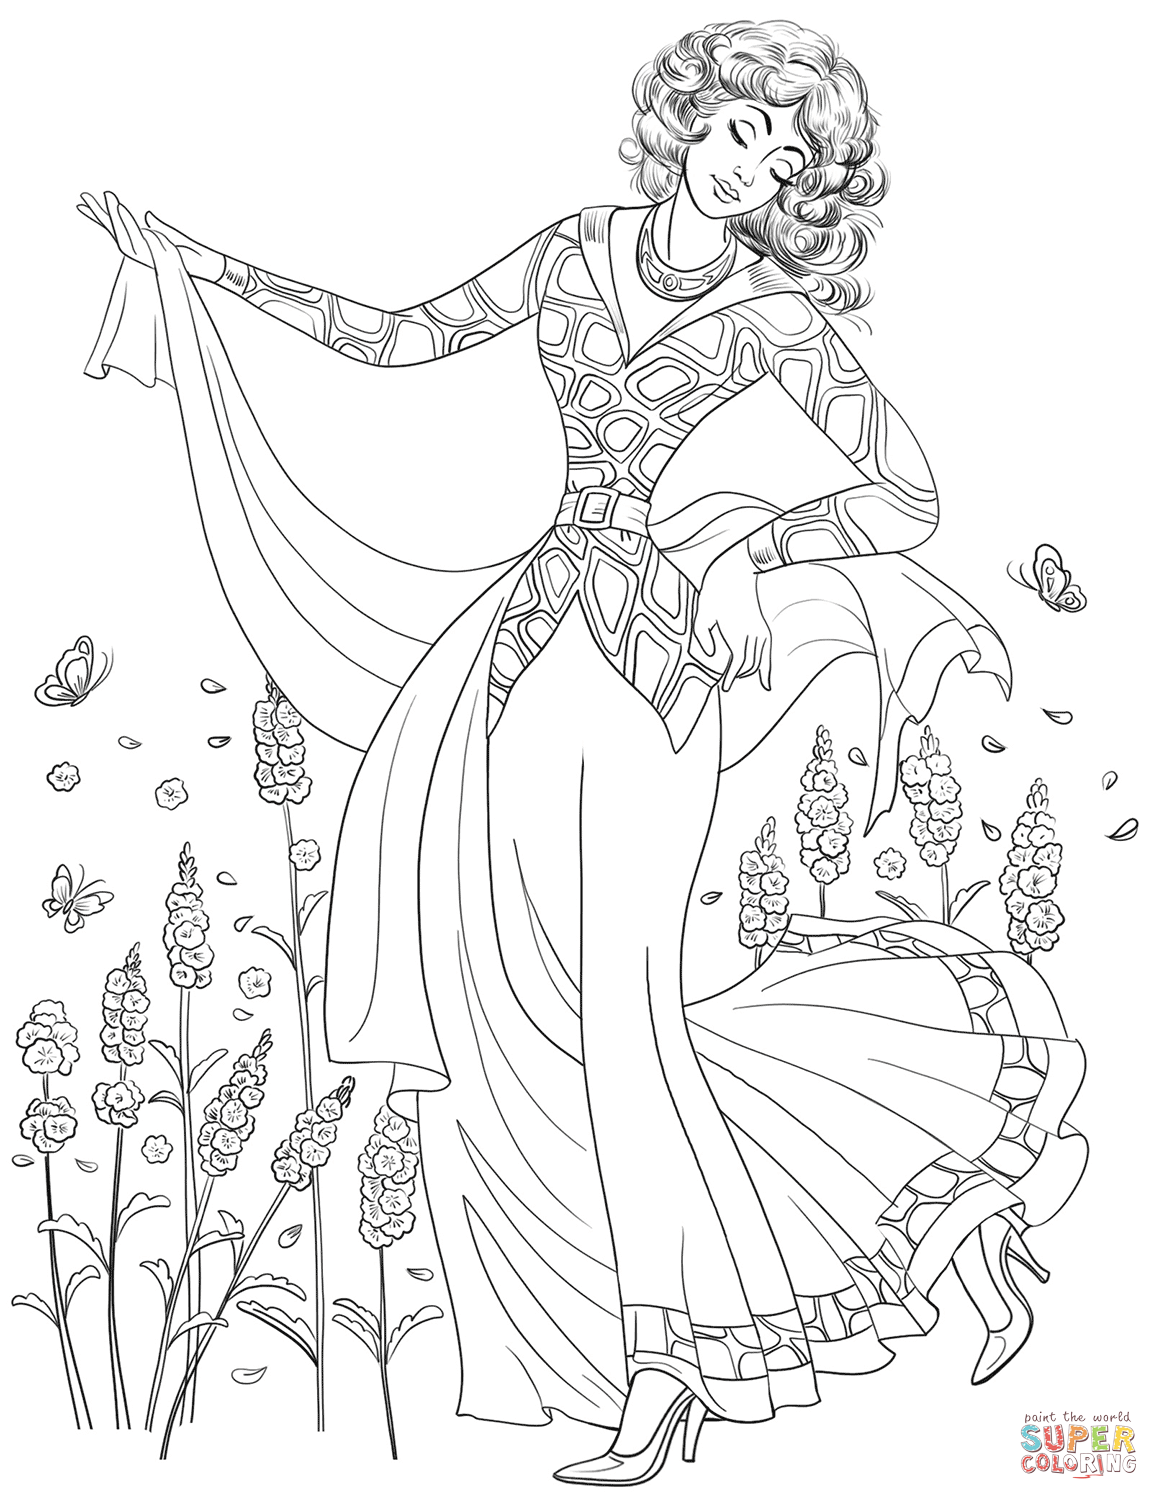 Woman from 80's coloring page | Free Printable Coloring Pages